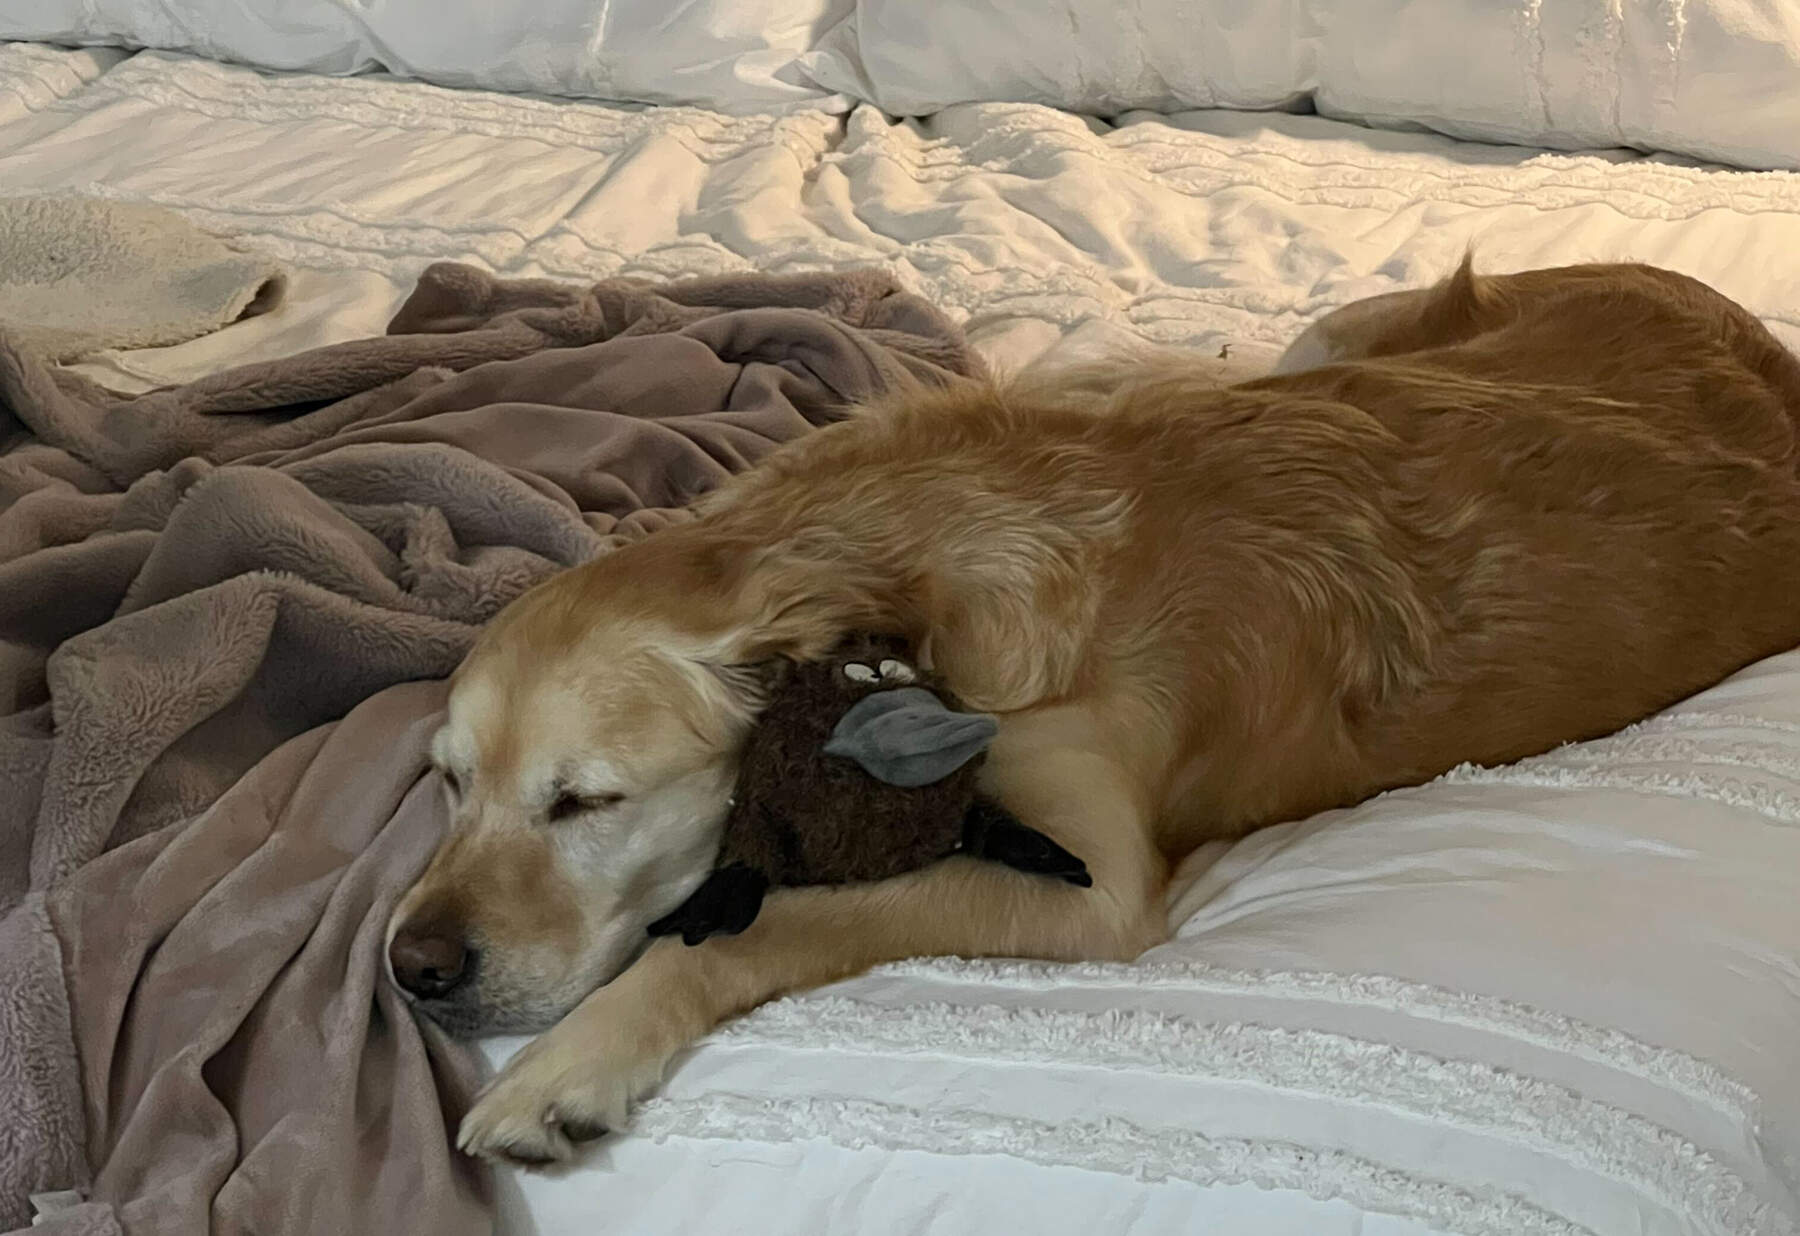 WBUR digital producer Derek Anderson's dog, Elsa the golden retriever with her platypus, Petey. Whether it's winter or not, it's always a 